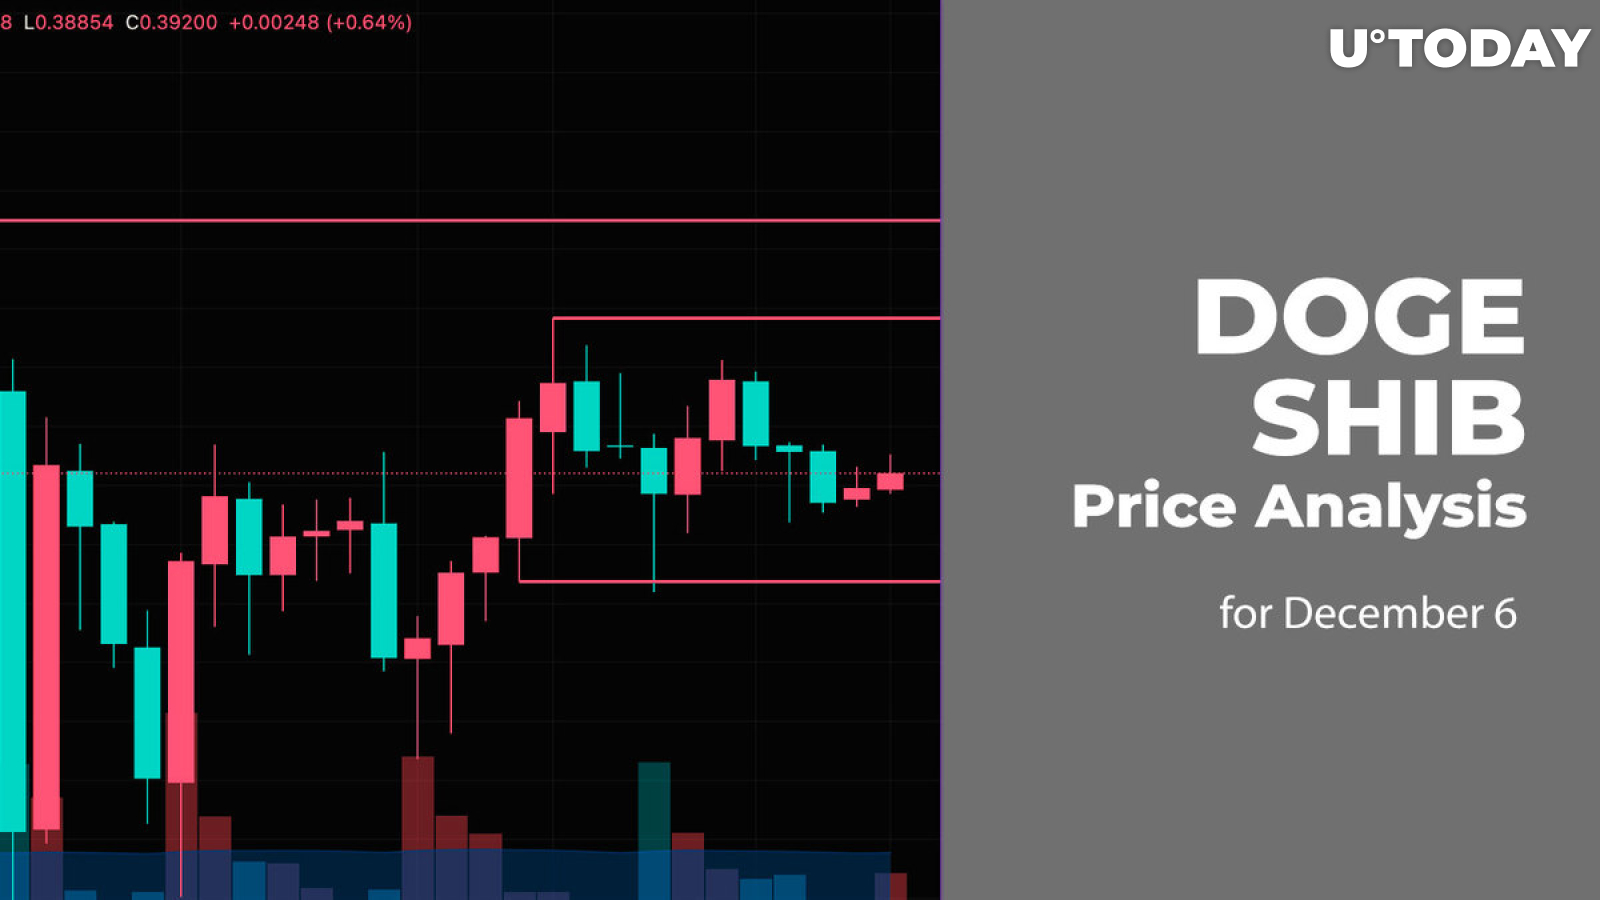 DOGE and SHIB Price Analysis for December 6